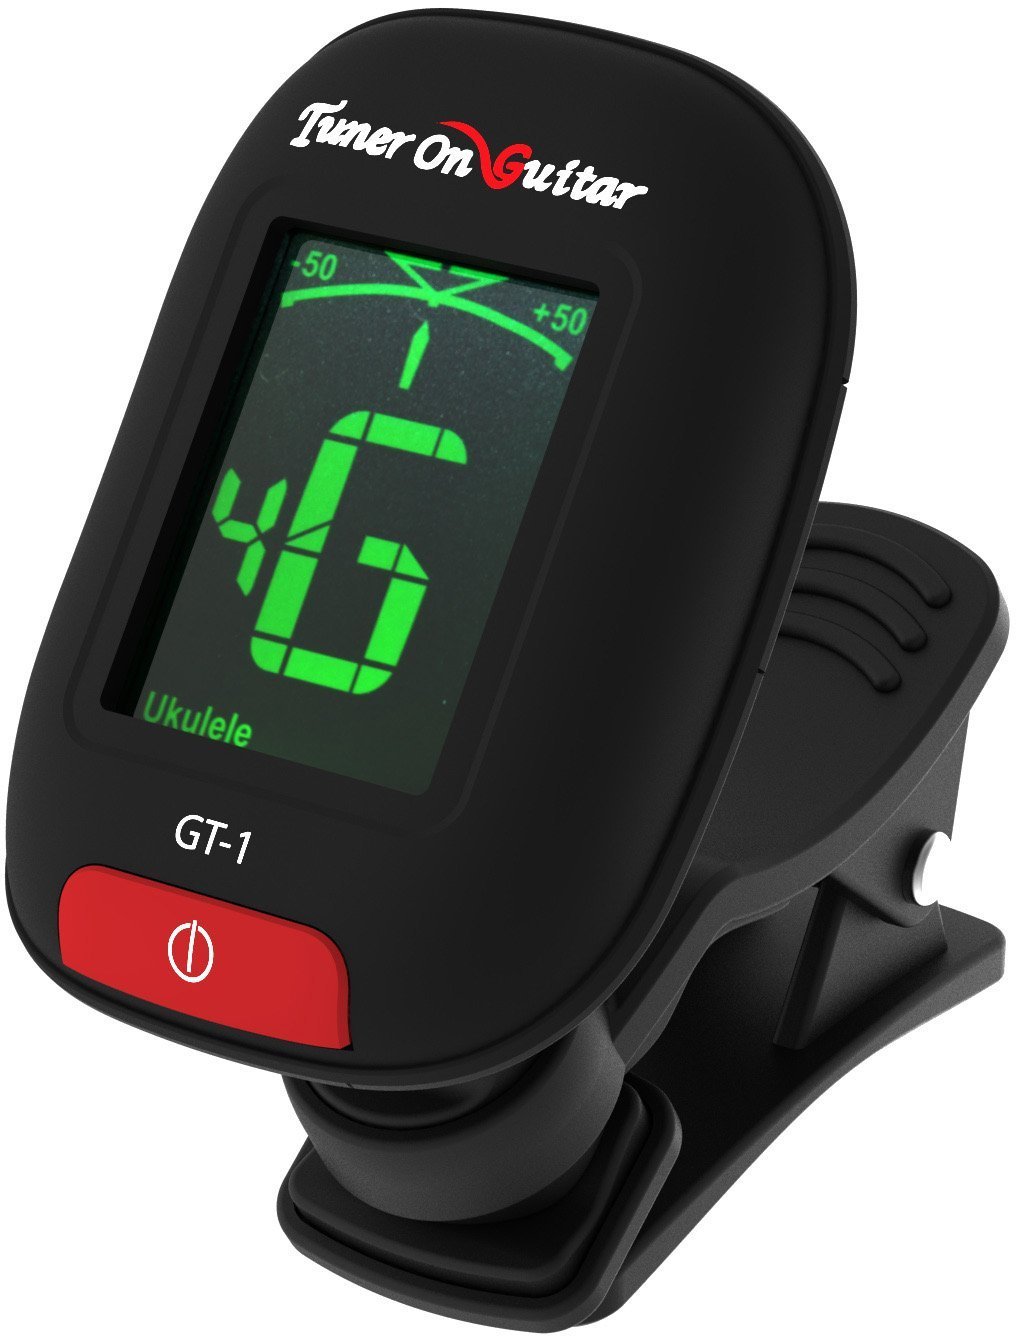 Tuner On Guitar - Clip-On Tuner for All Instruments, Guitar, Ukulele, Bass, Violin, Chromatic Tuning Modes, Fast & Accurate, Easy to Use, Auto Power Off, Battery Included. black